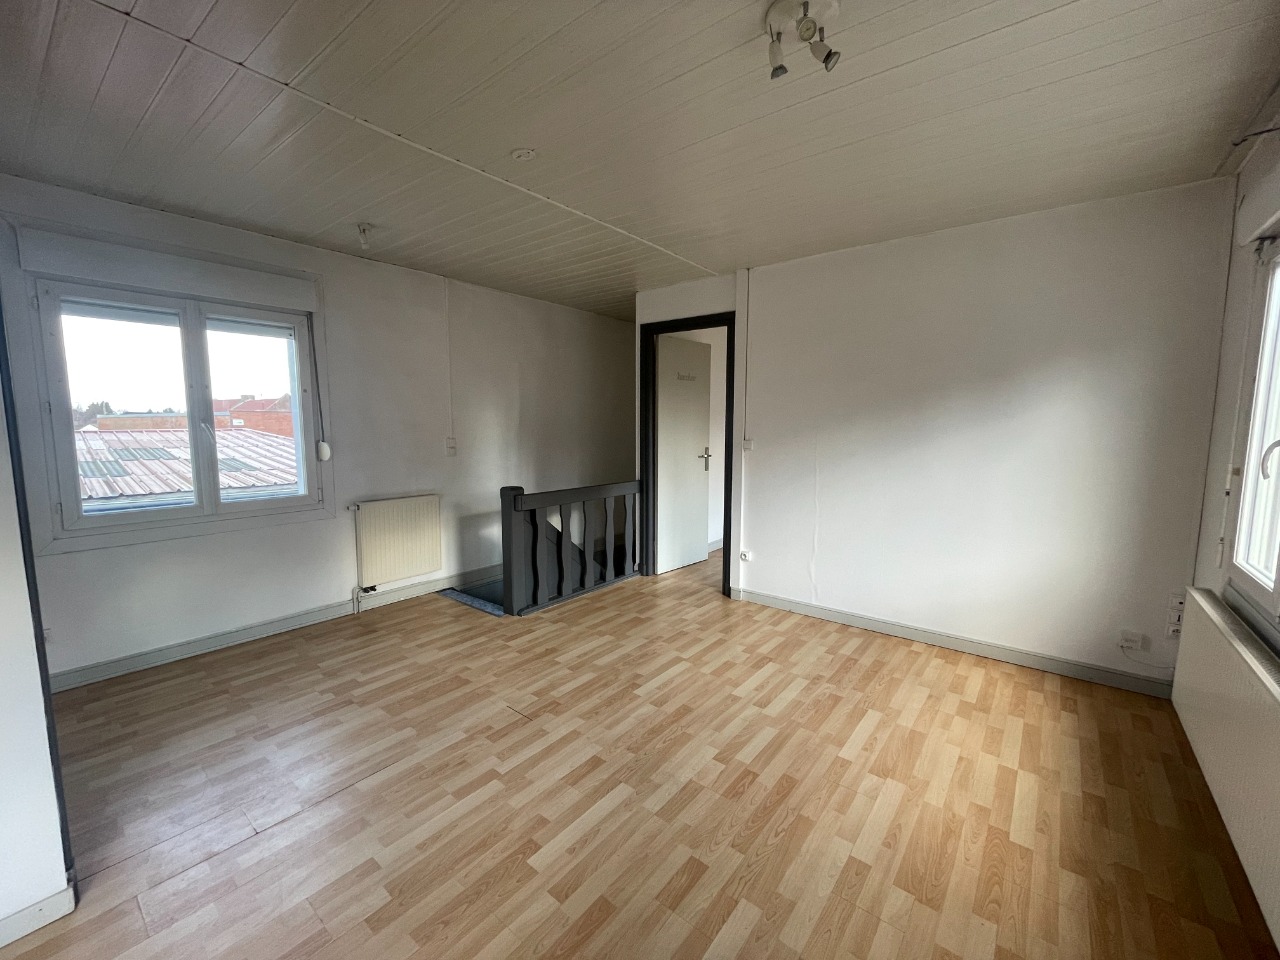 Don appartement type 2 non meuble renove Photo 3 - JLW Immobilier